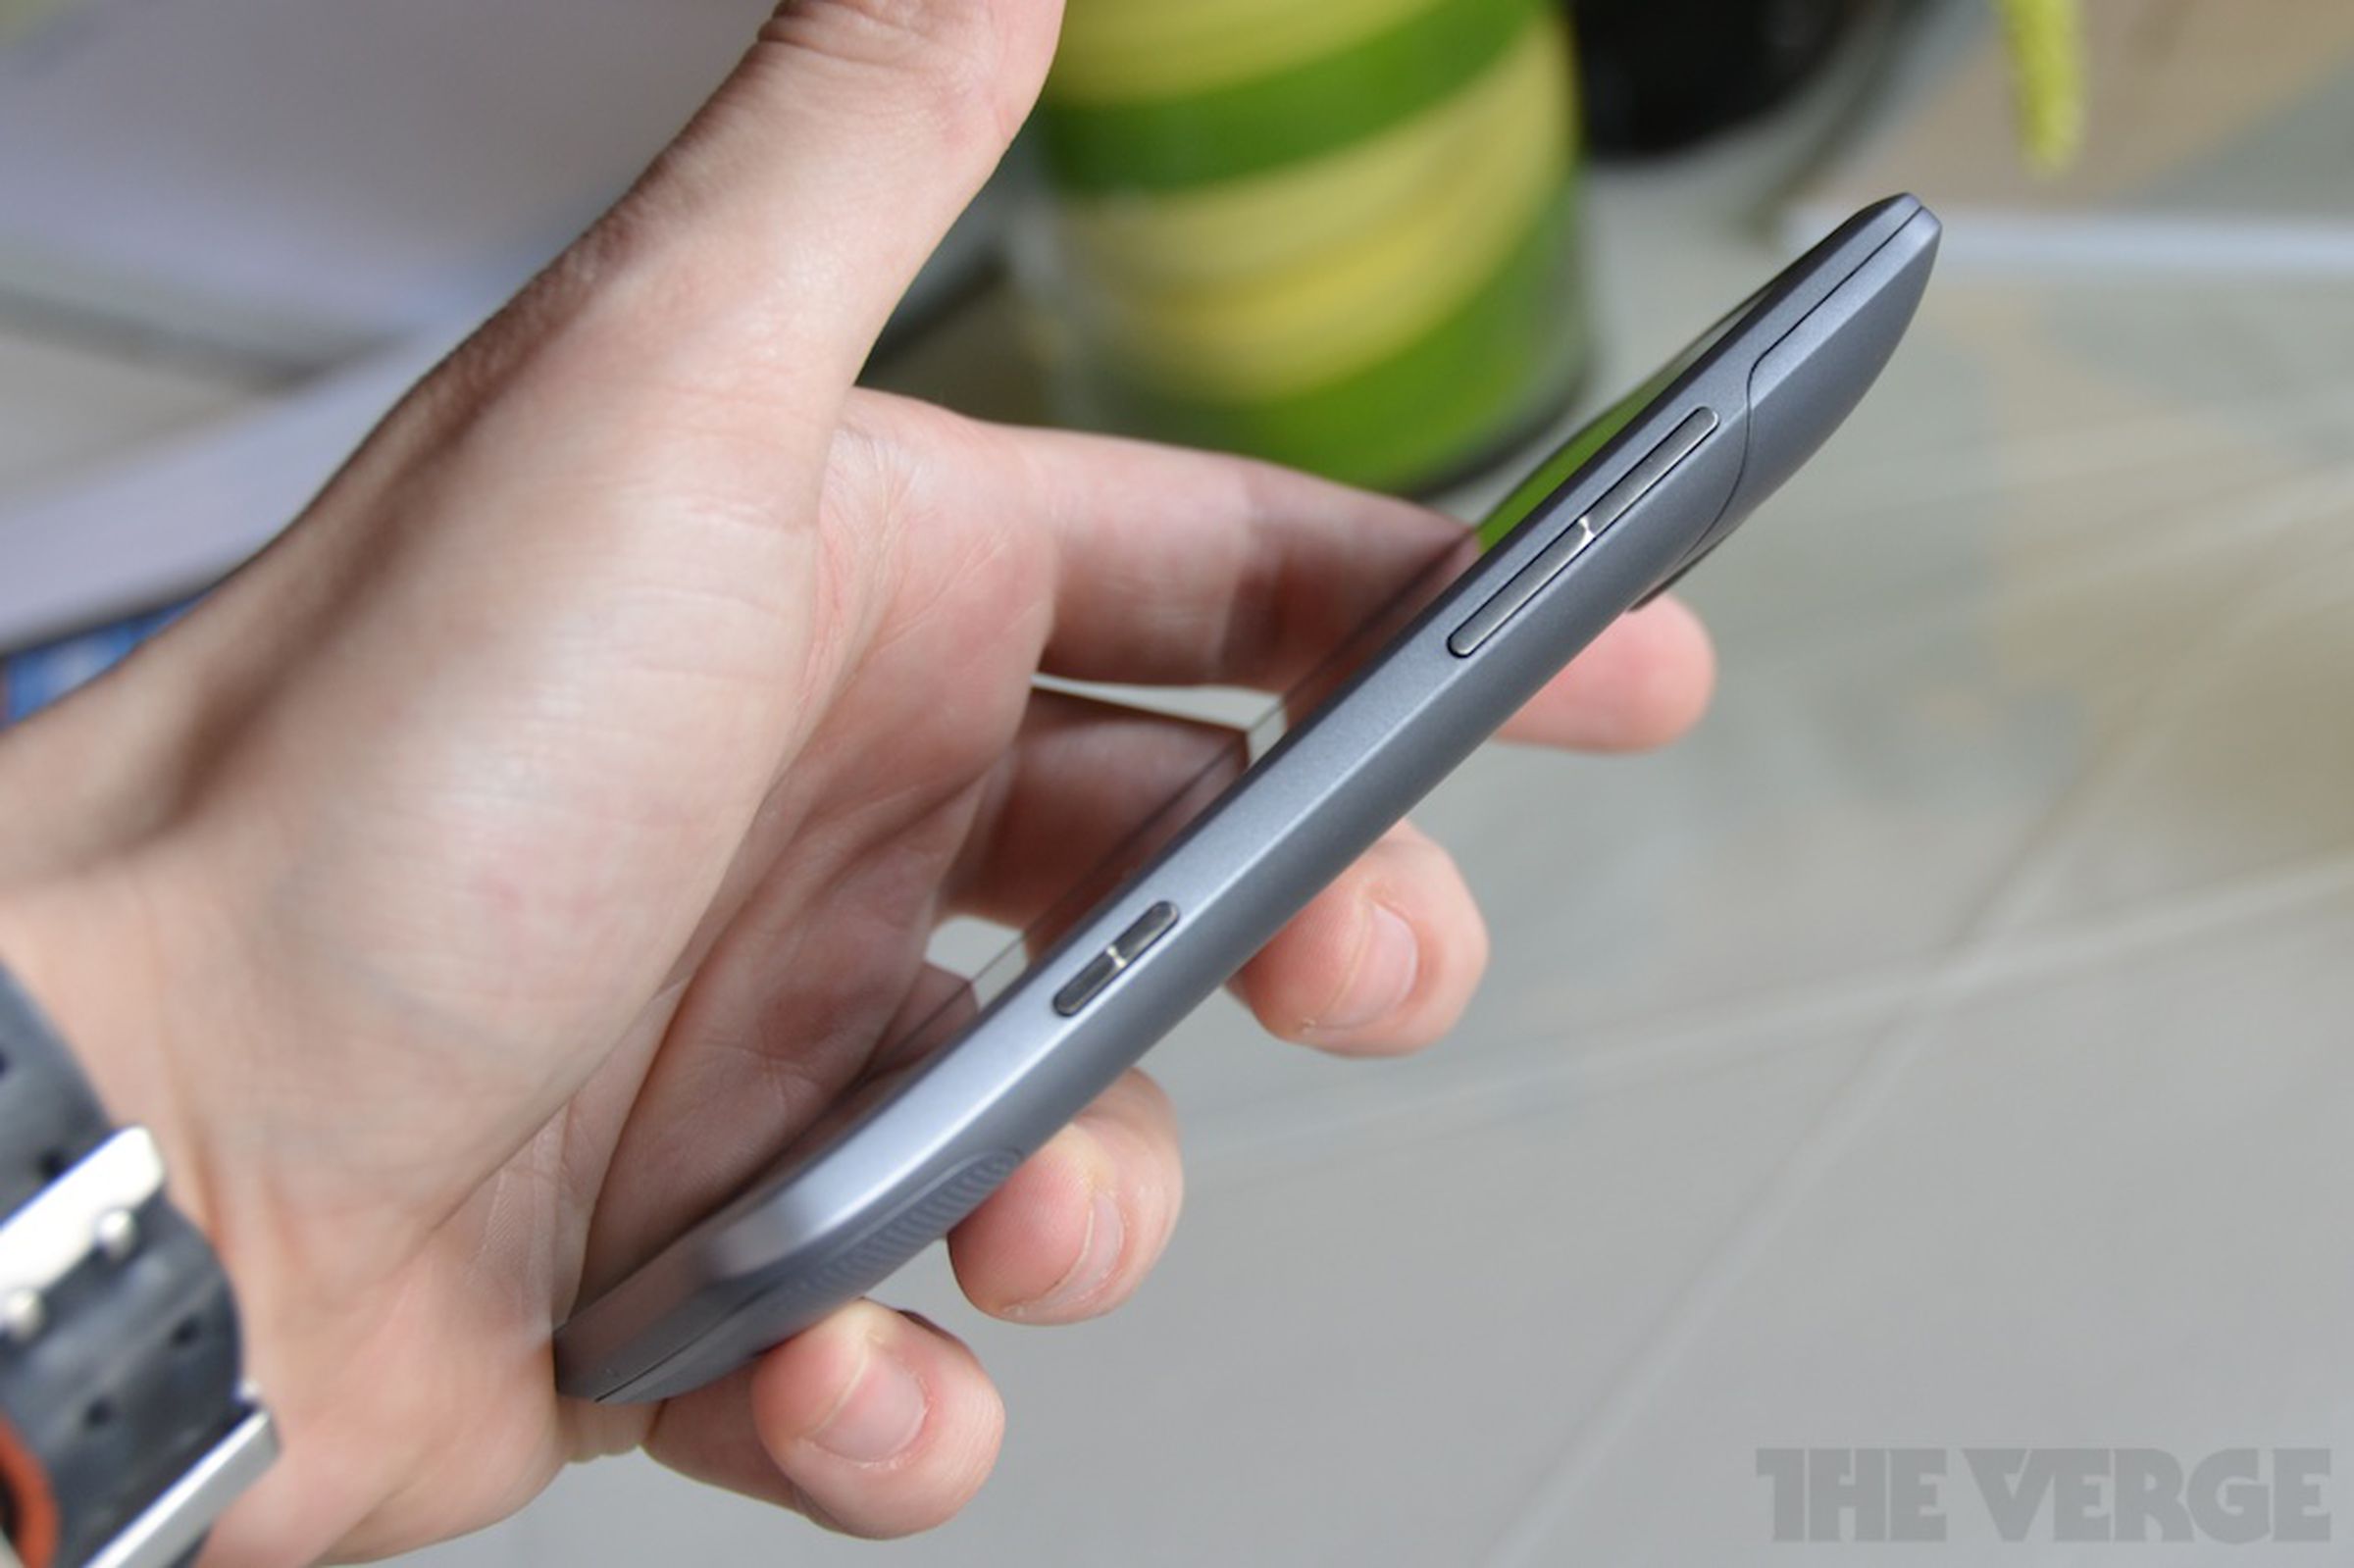 HTC Titan II for AT&T first hands-on